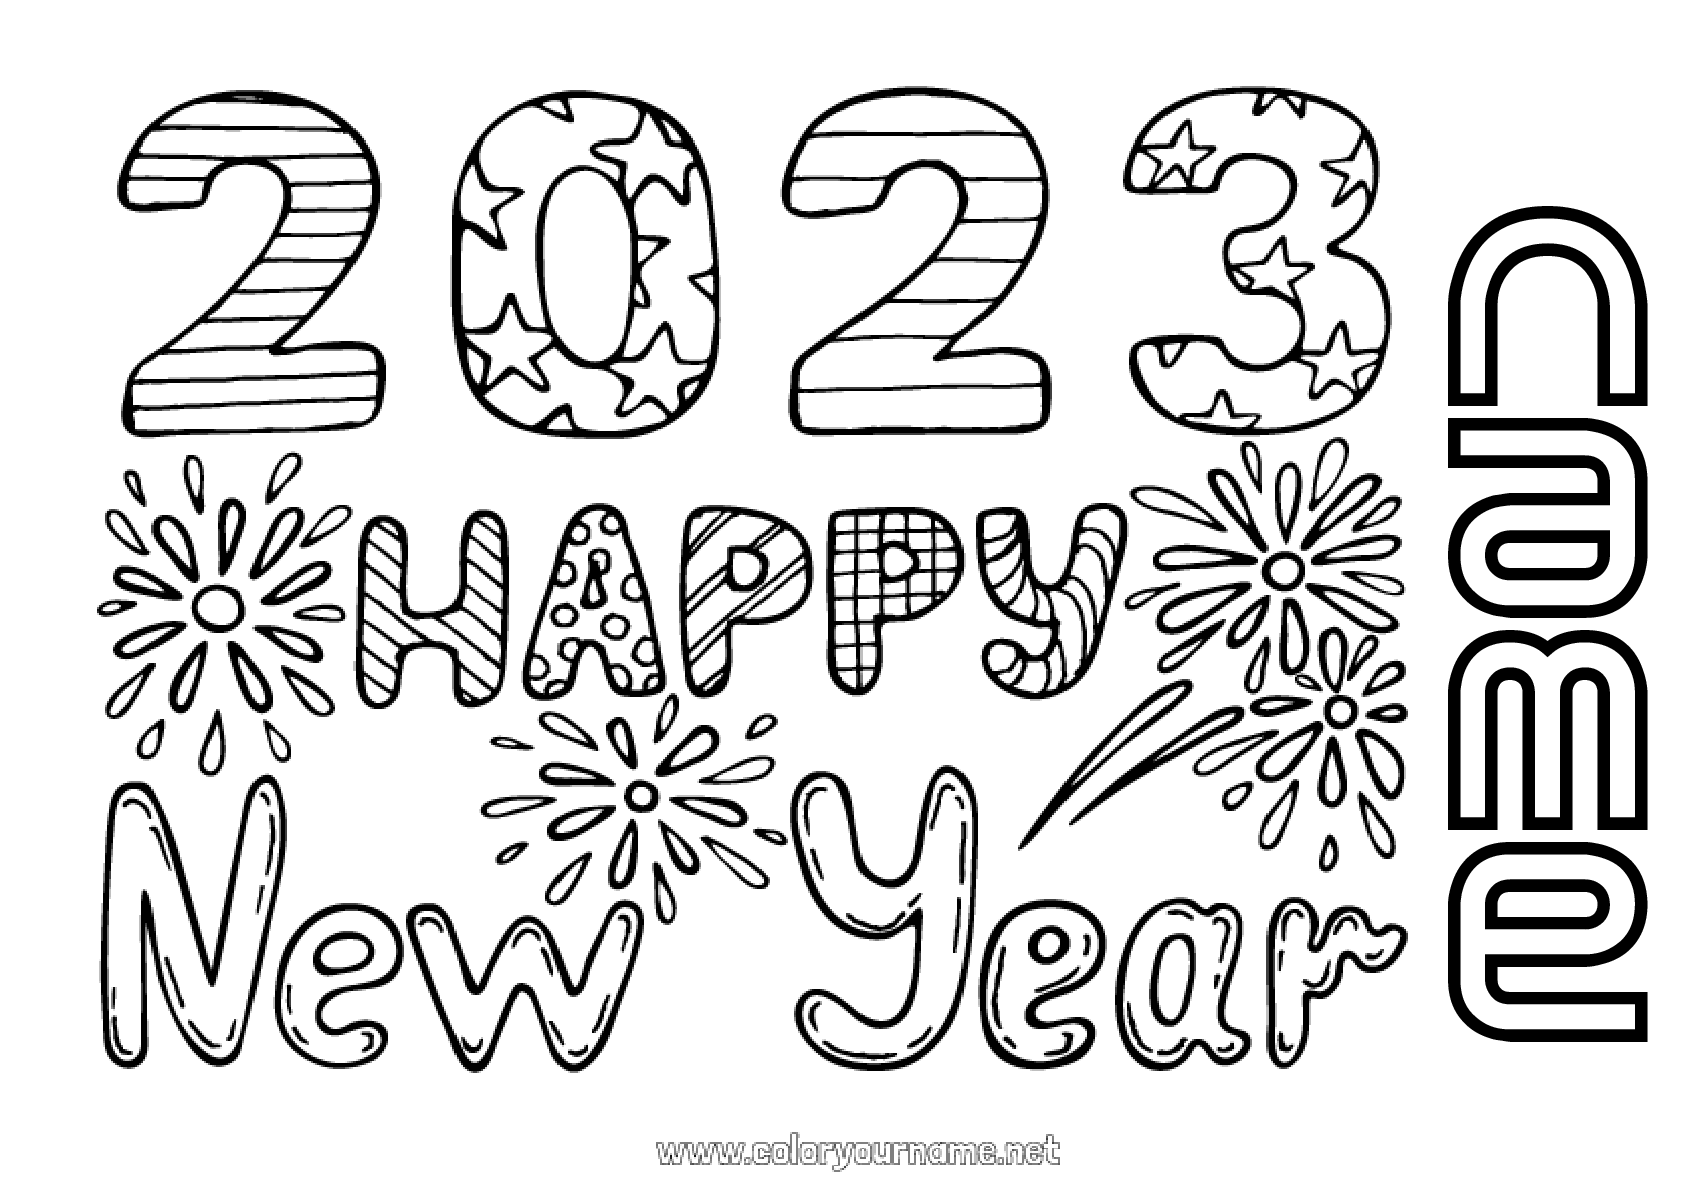 coloring-page-no-579-2023-happy-new-year-firework